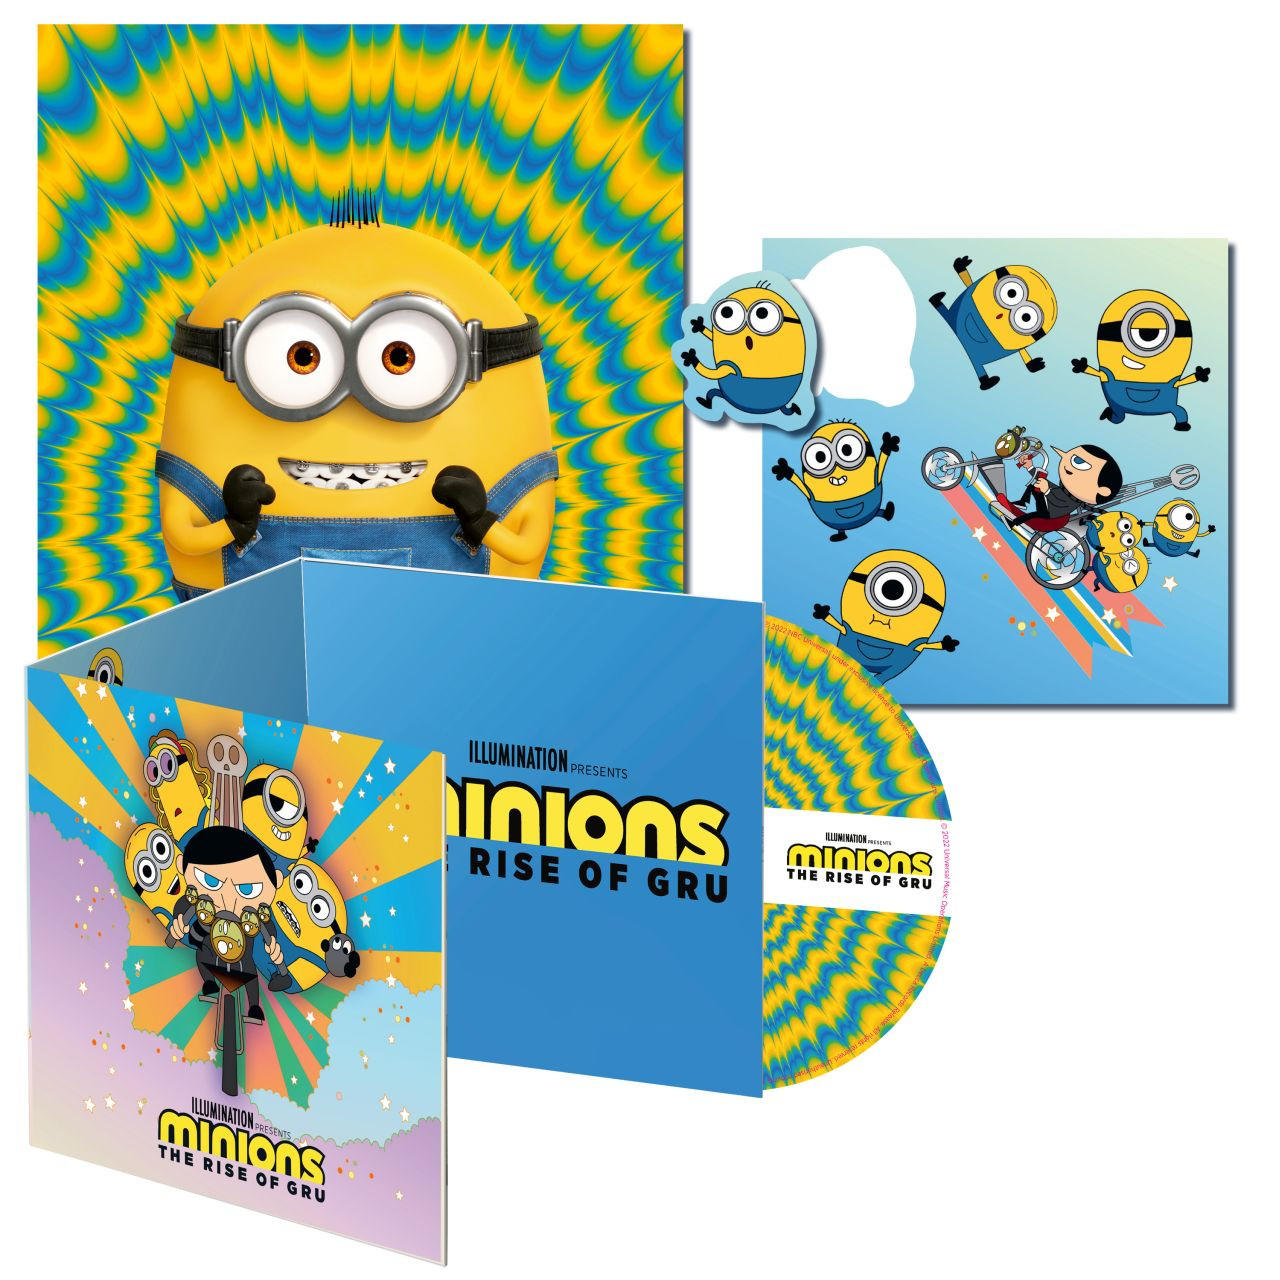 VARIOUS - Minions: (CD) Gru The Rise - Of